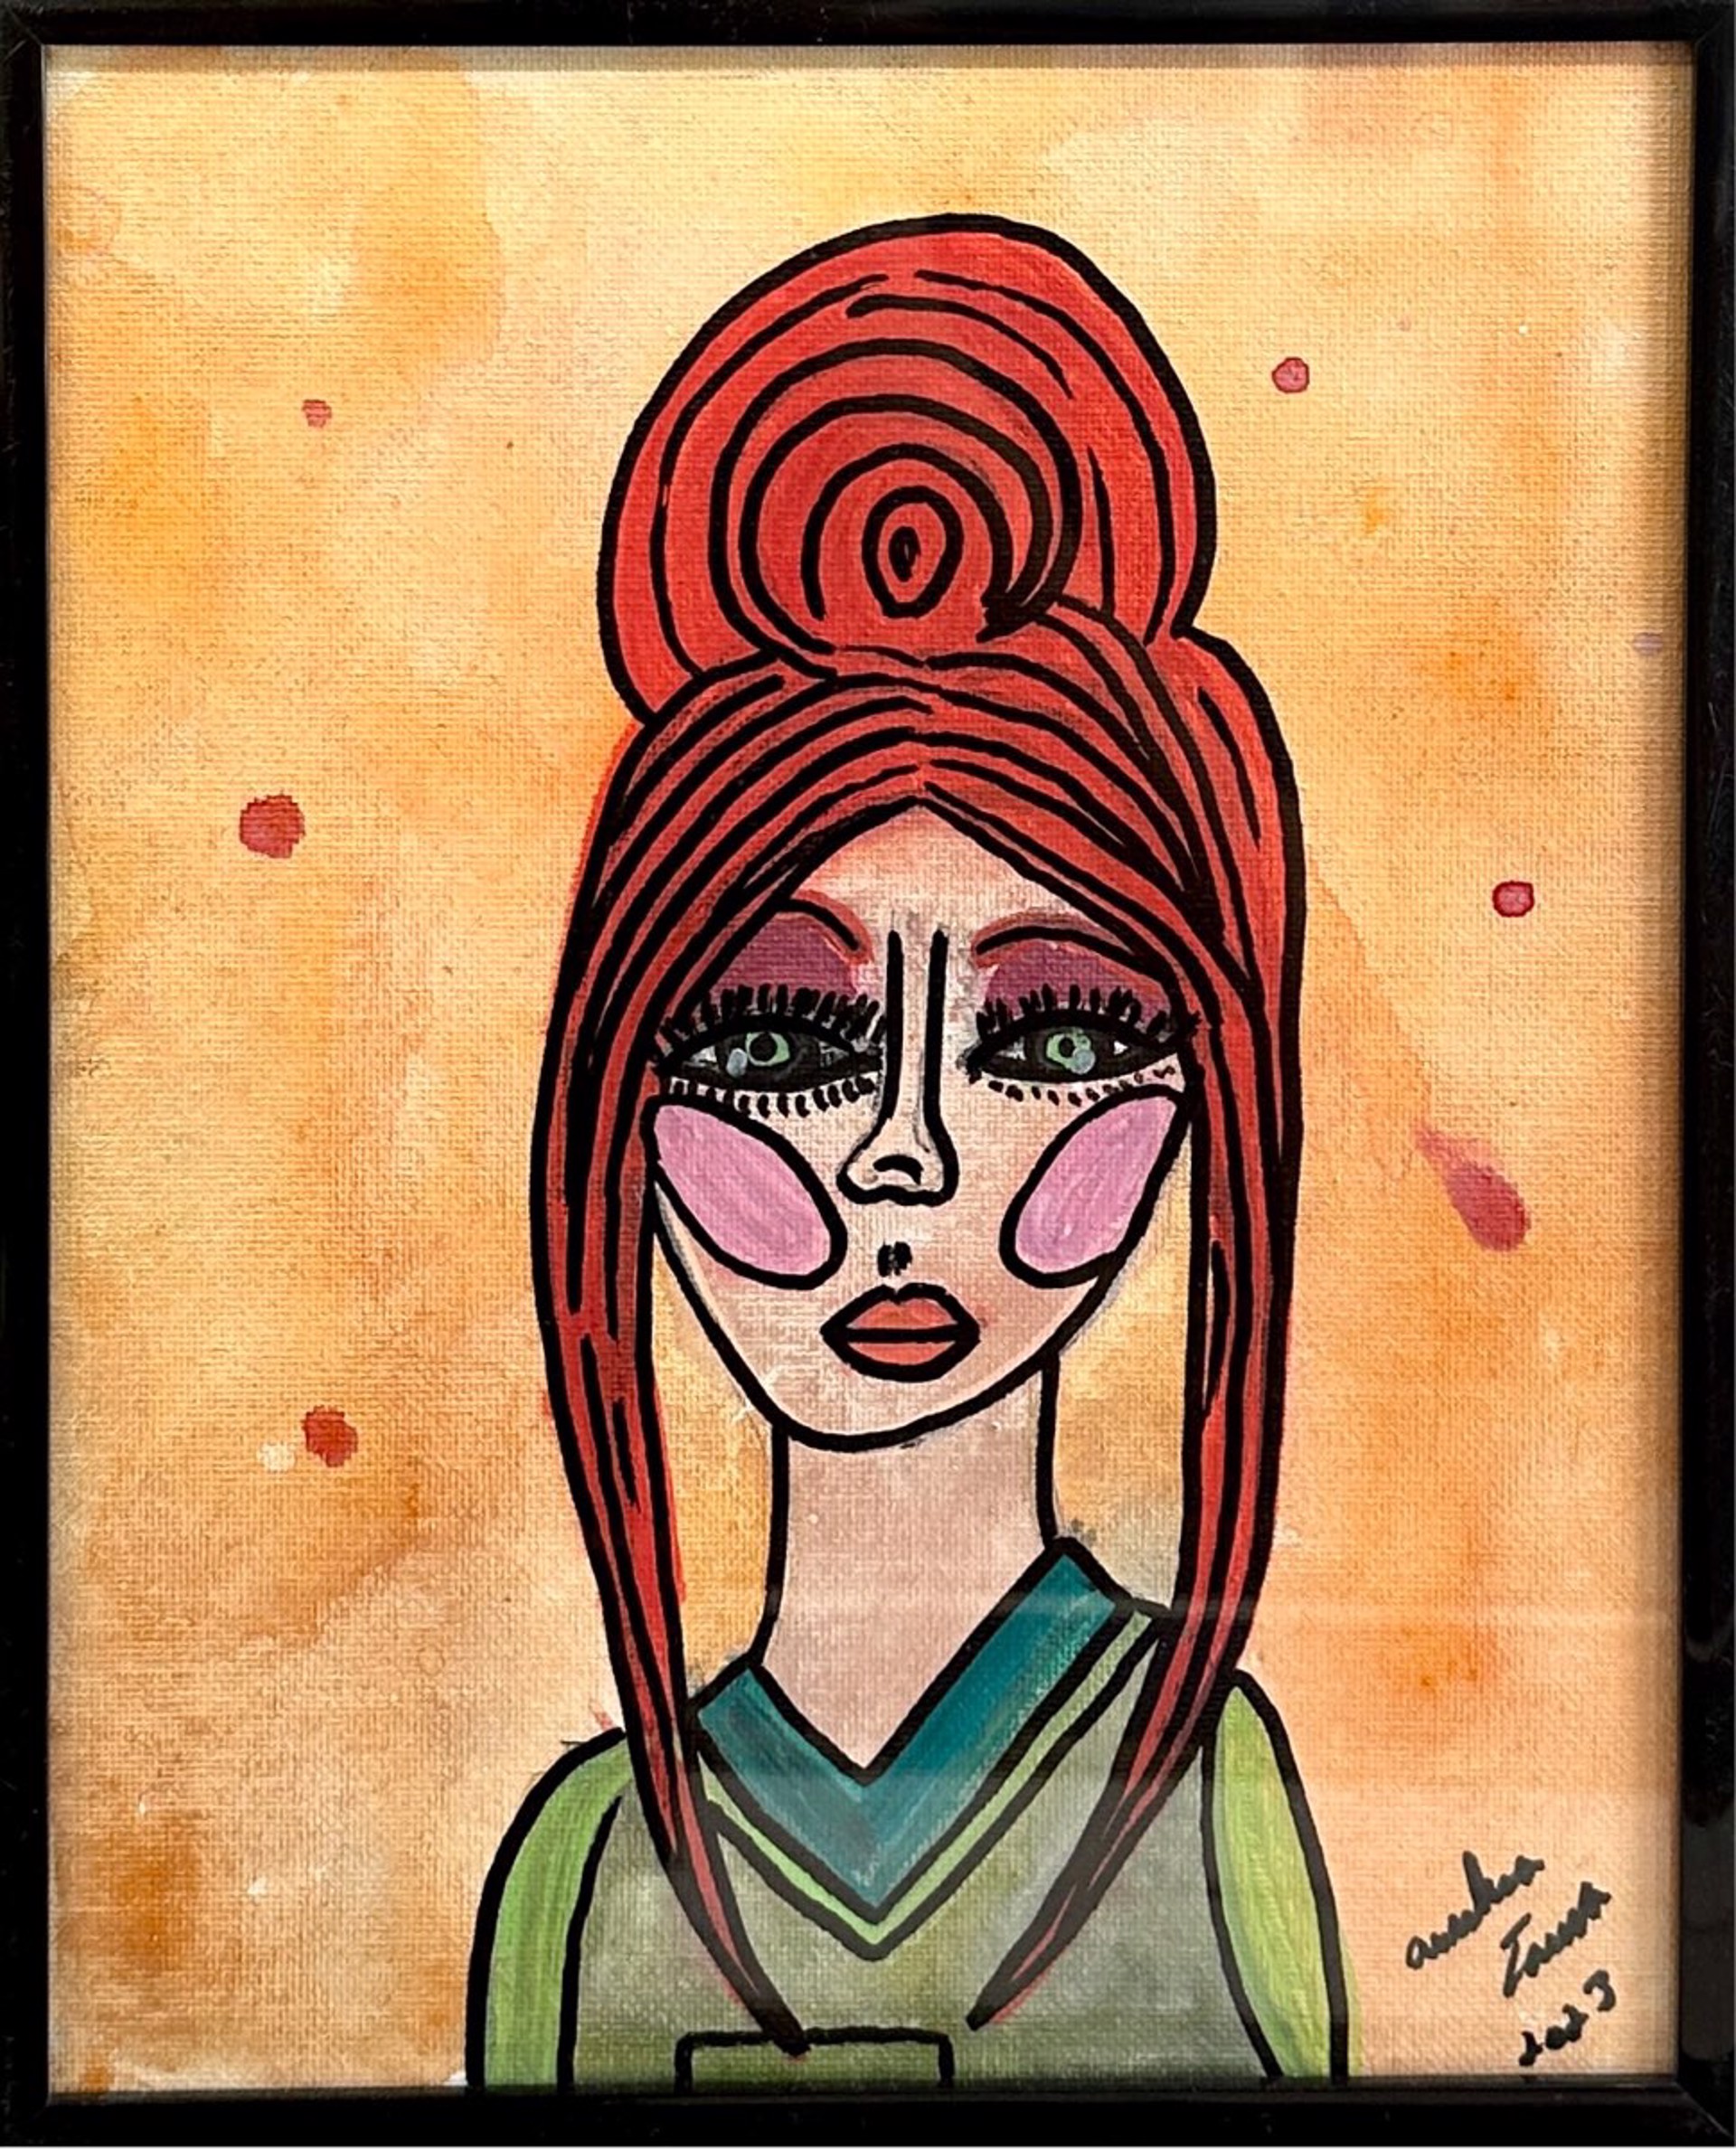 "Orange Hair Woman" by Aundrea T. by One Step Beyond